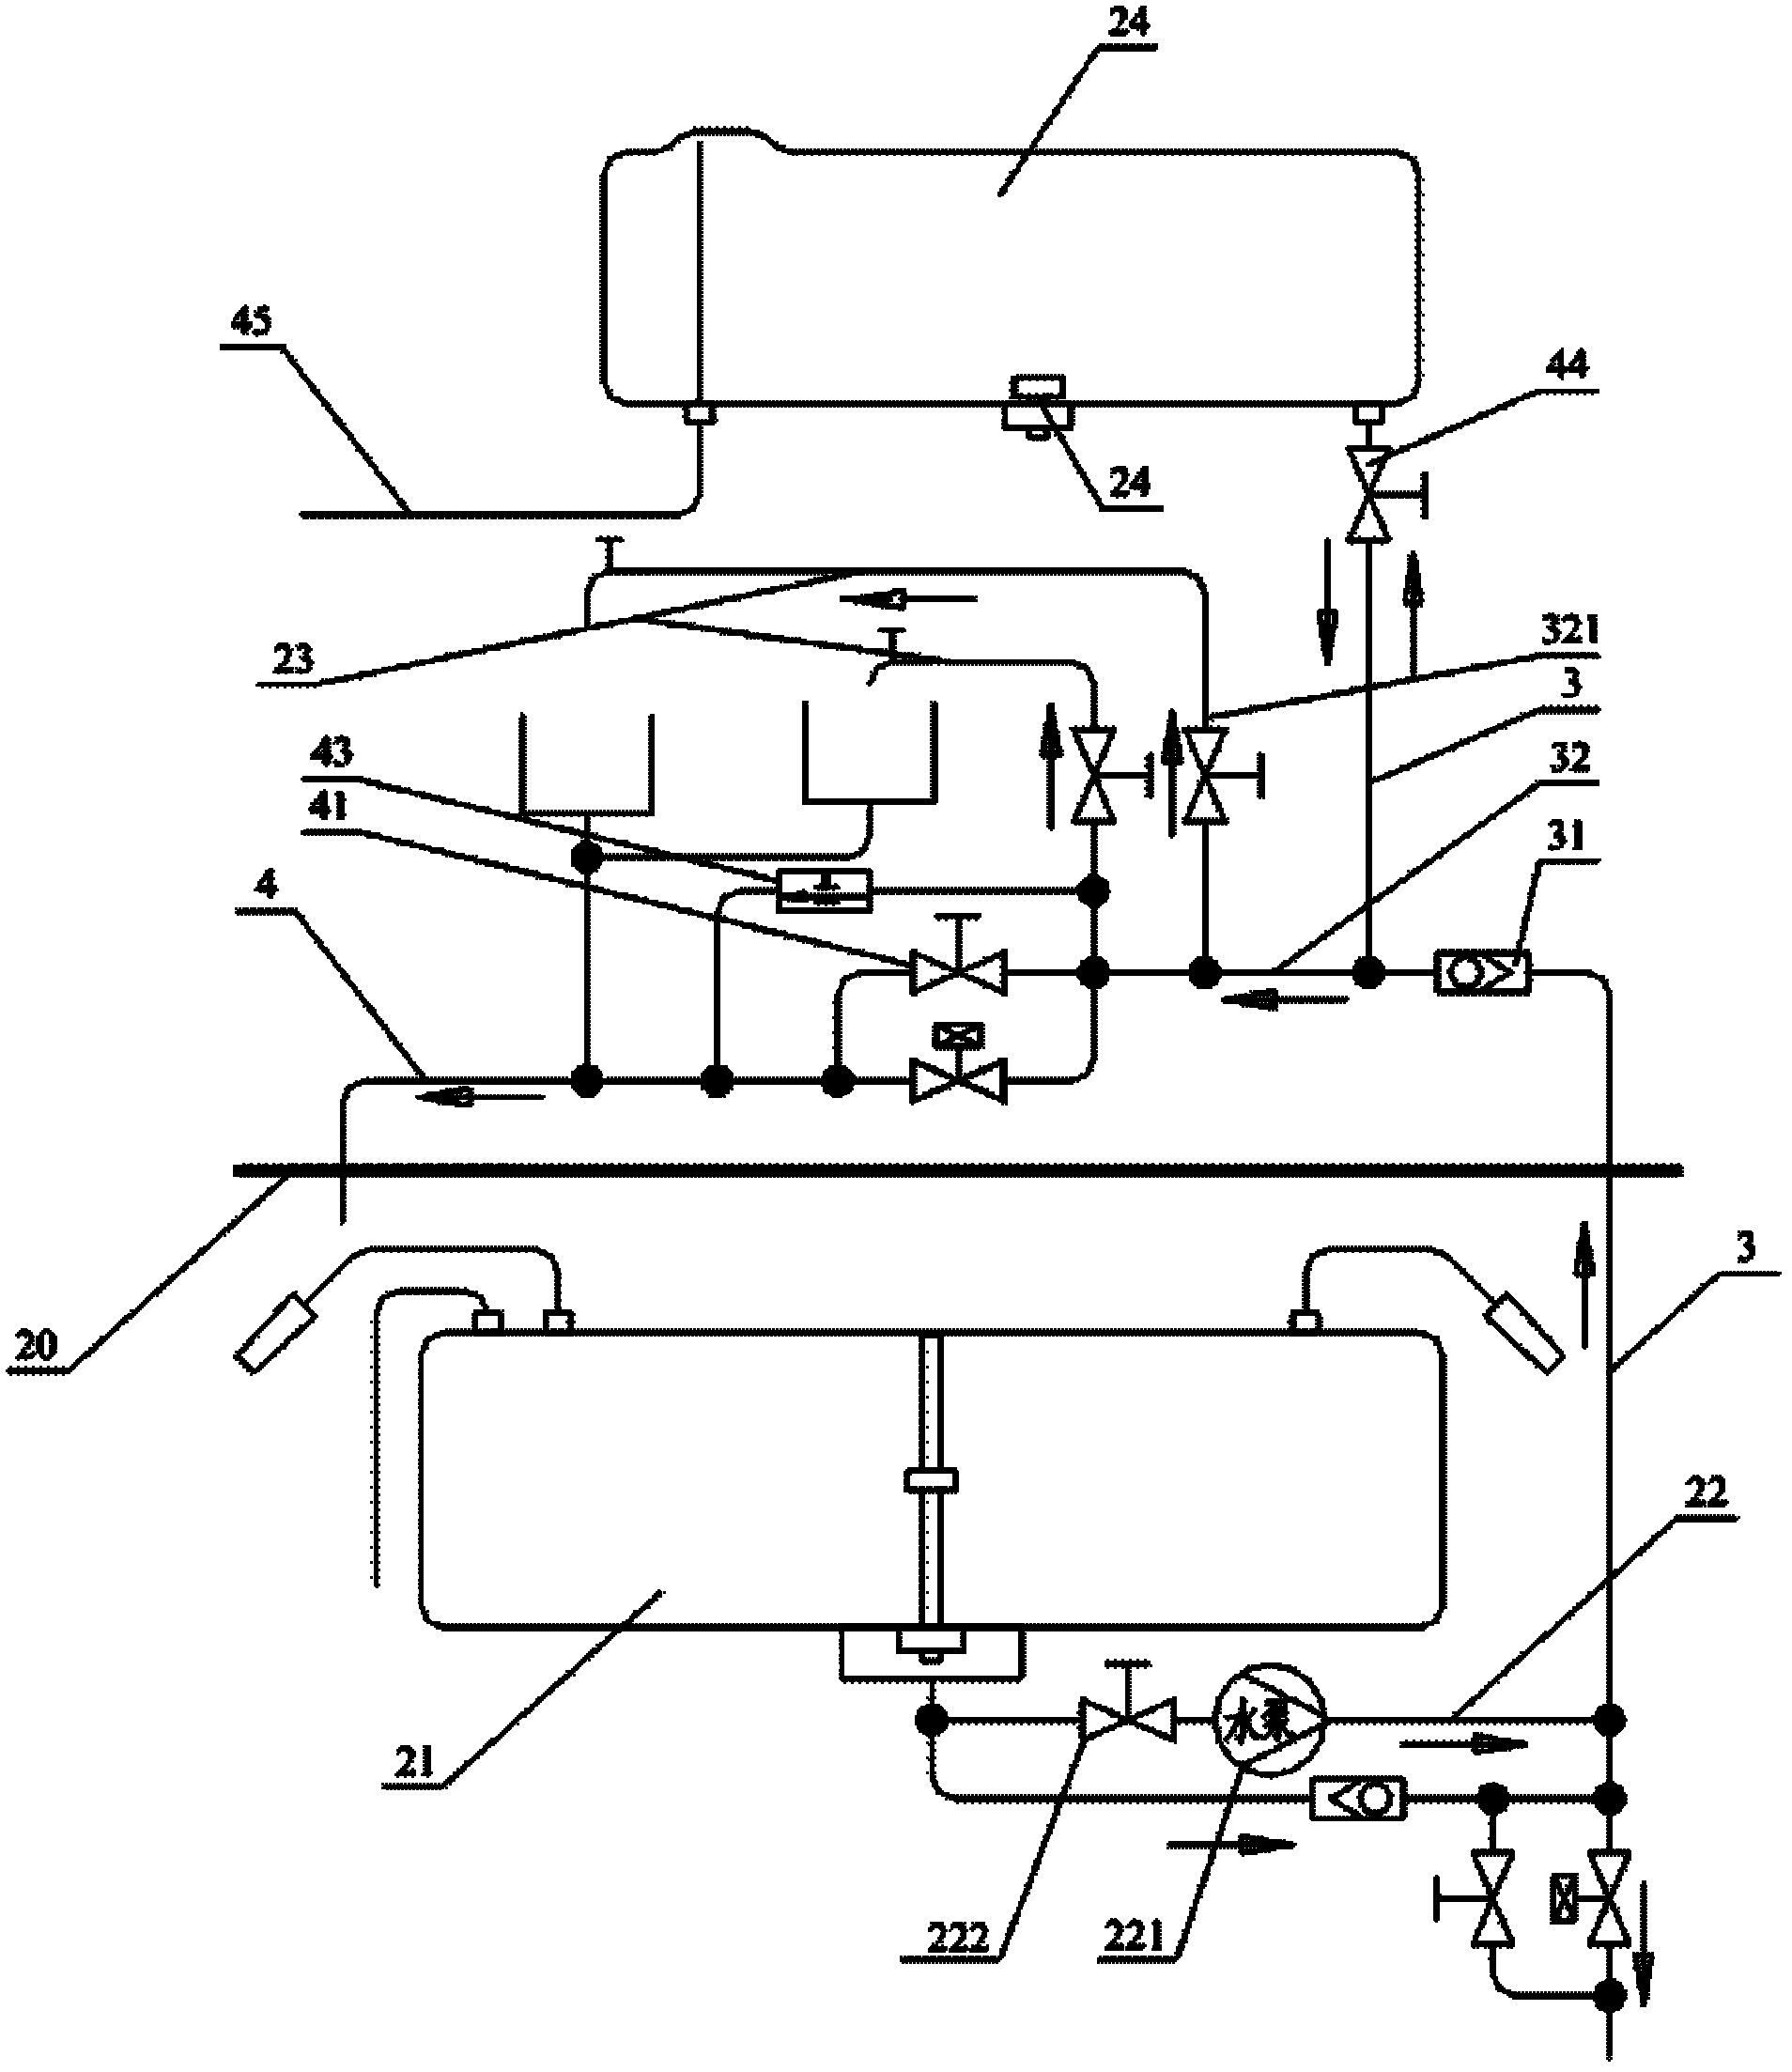 Water supply system of railway vehicle